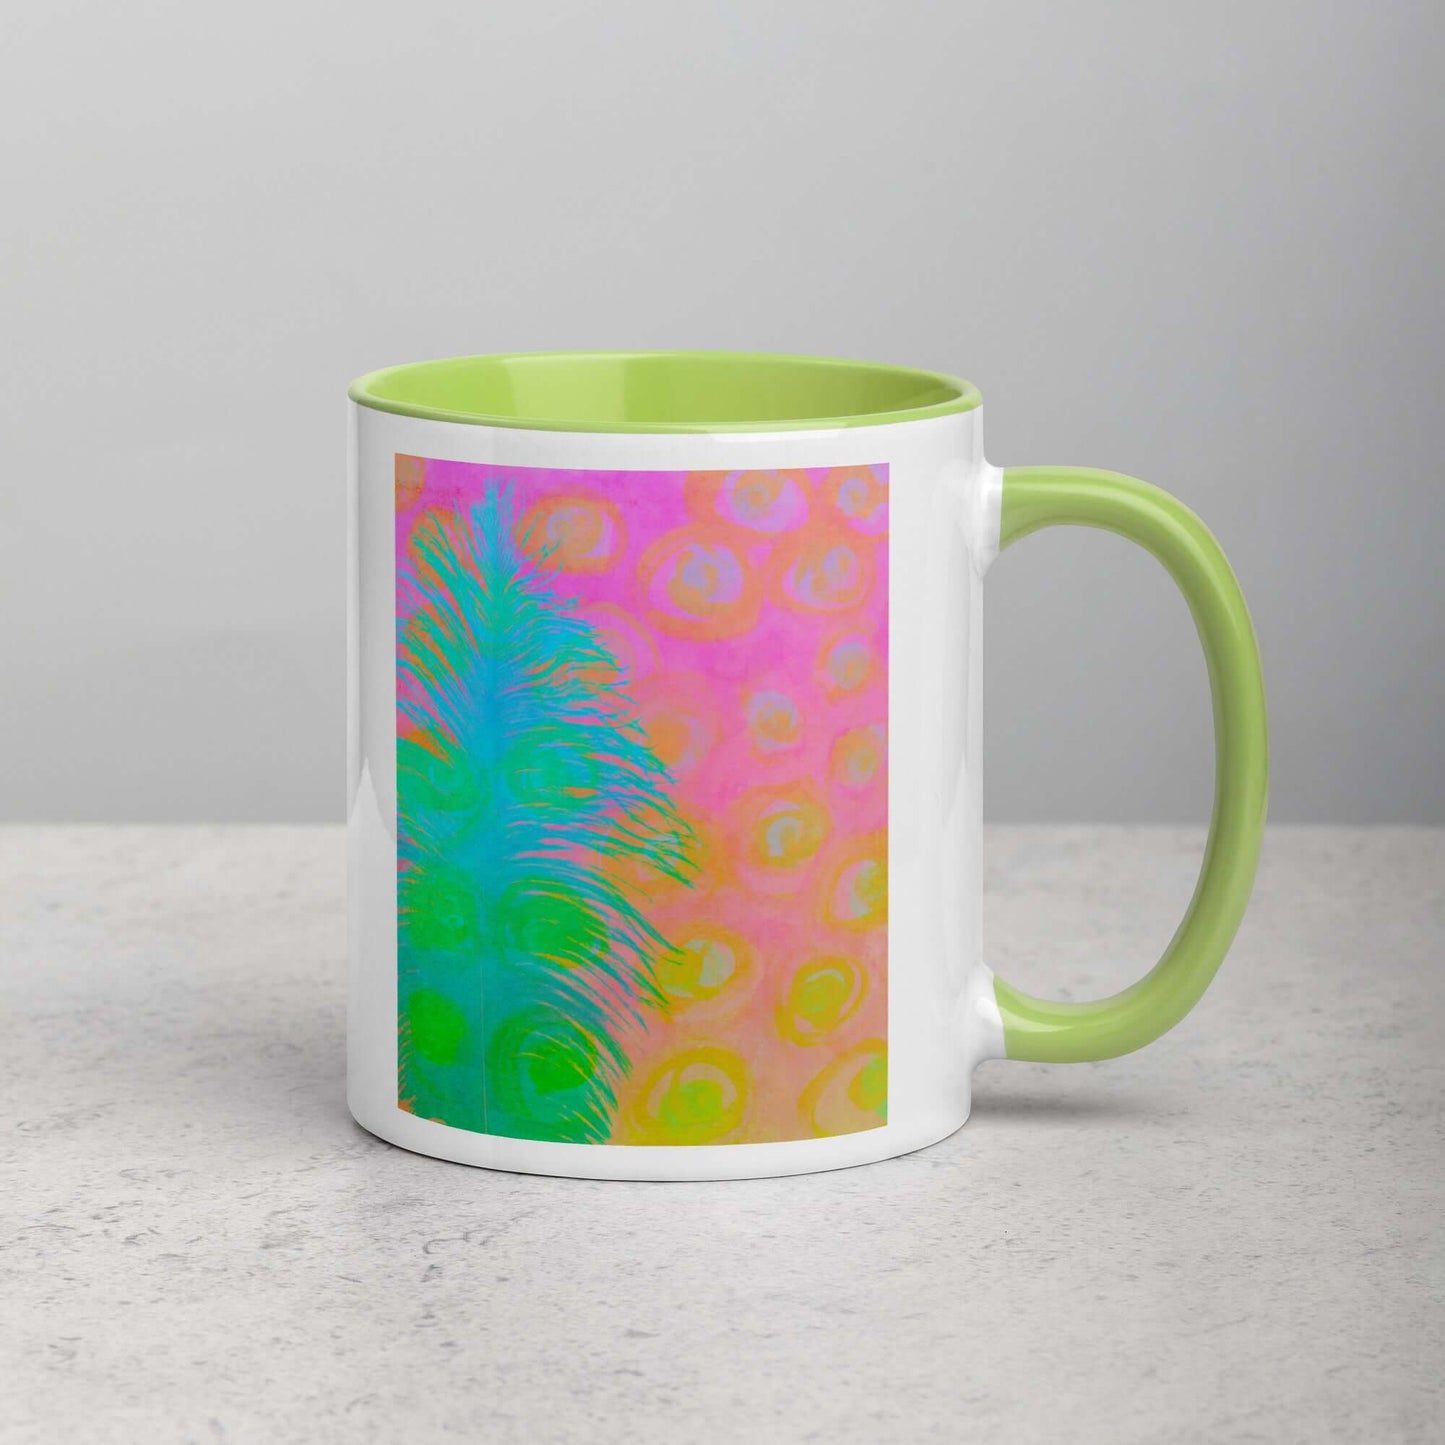 Bright Blue-Green Ostrich Feather on Pink and Yellow Background “My Other Half” Abstract Art Mug with Lime Green Color Inside Right Handed Front View